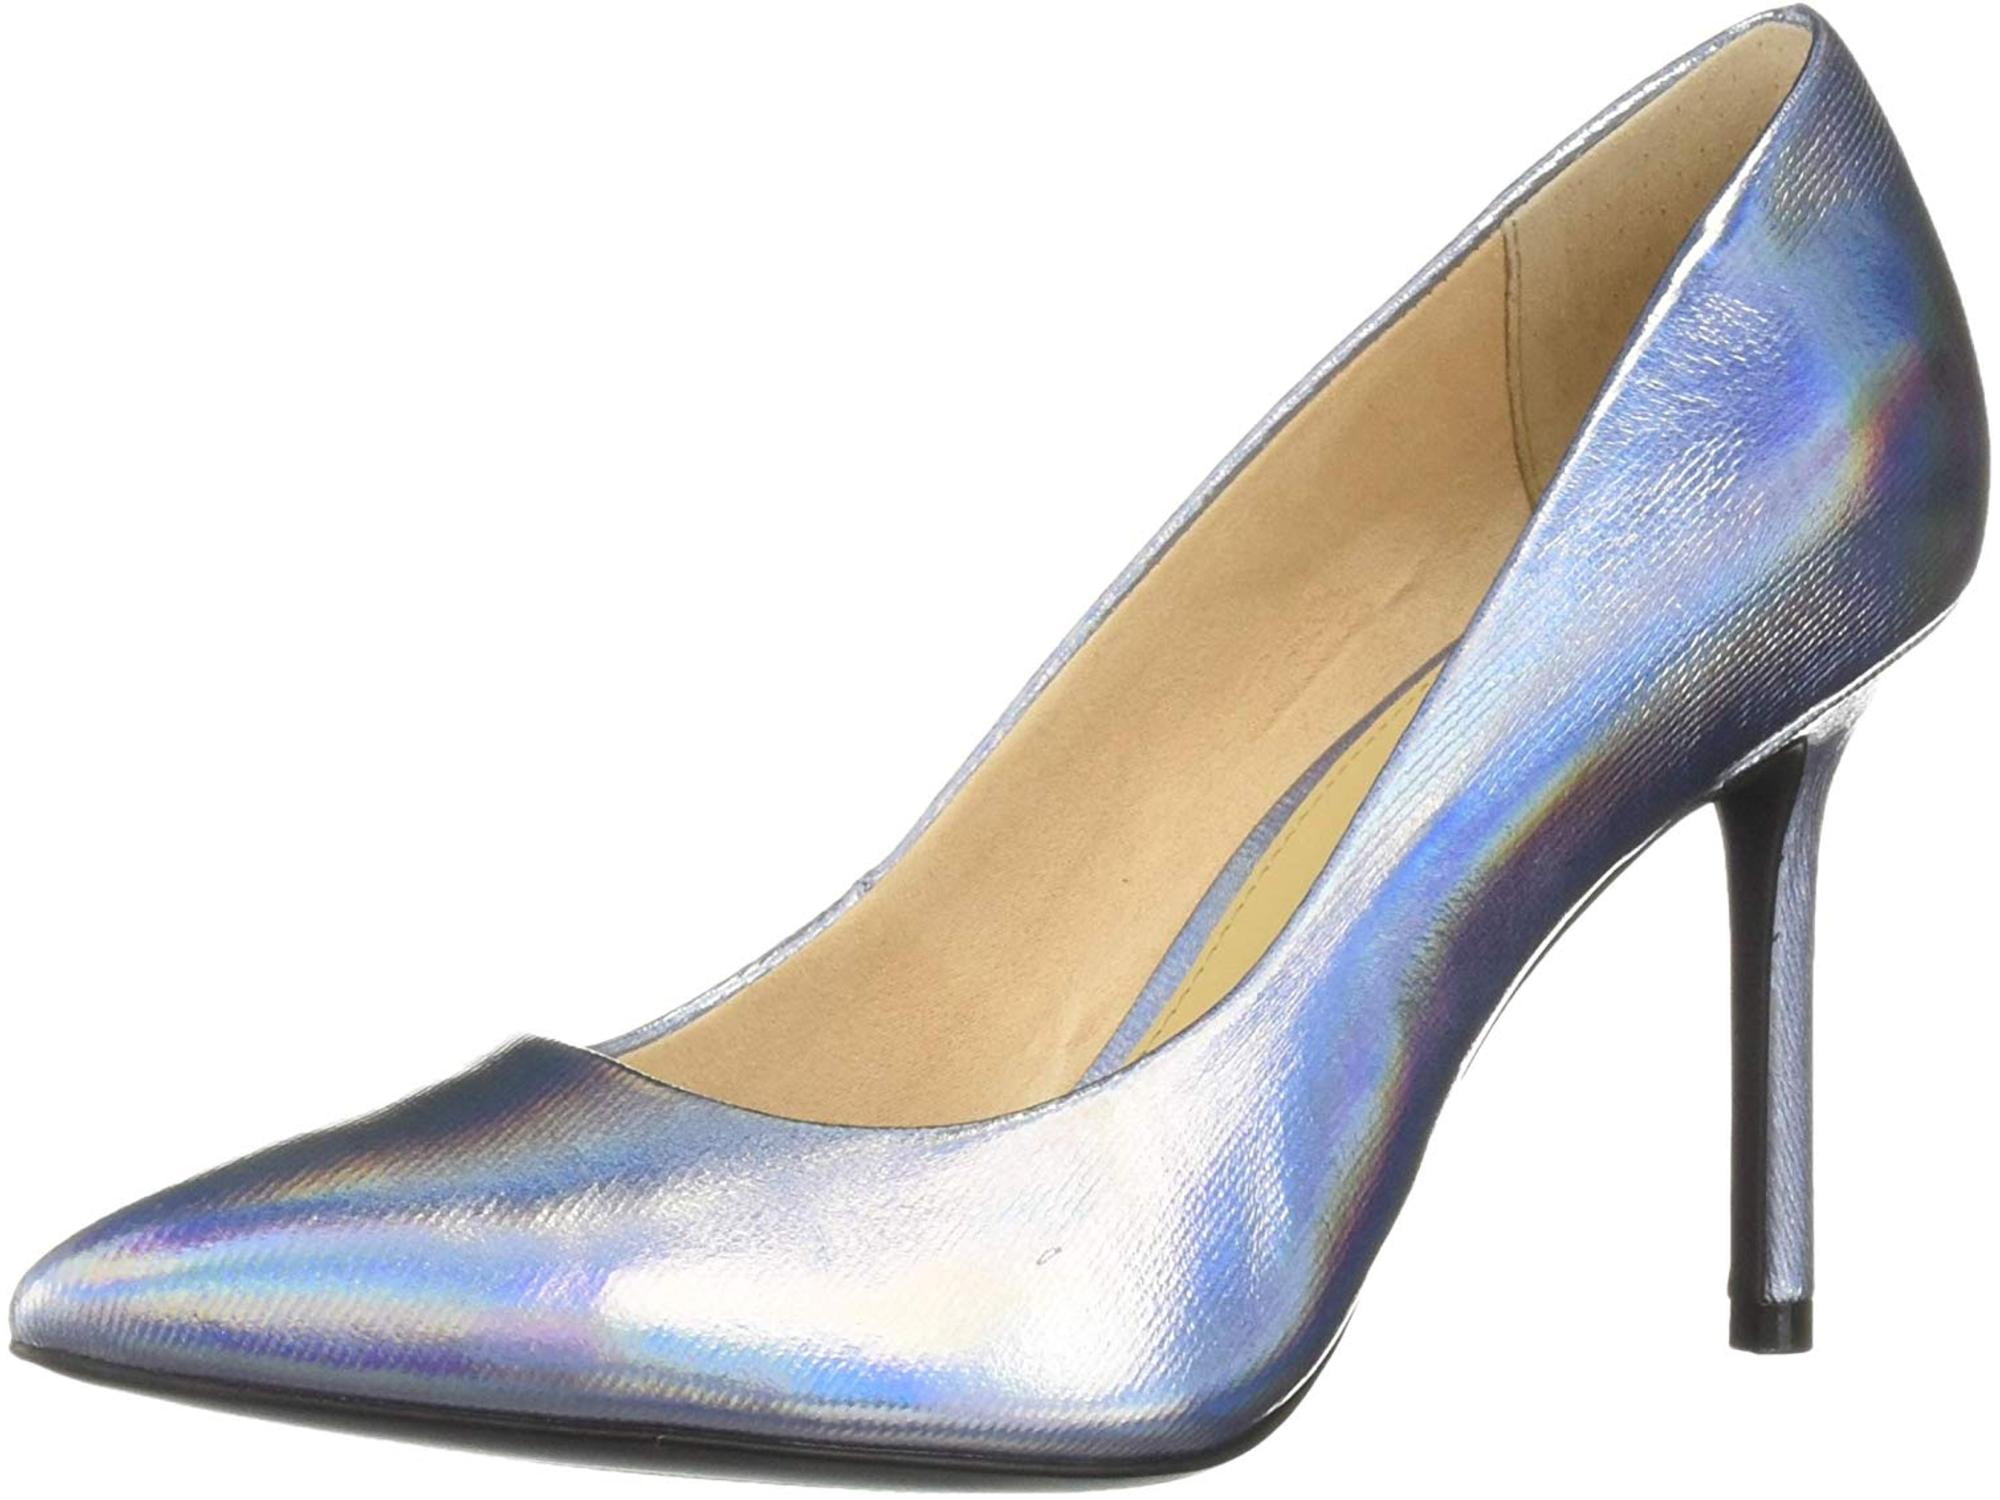 katy perry lucite pump